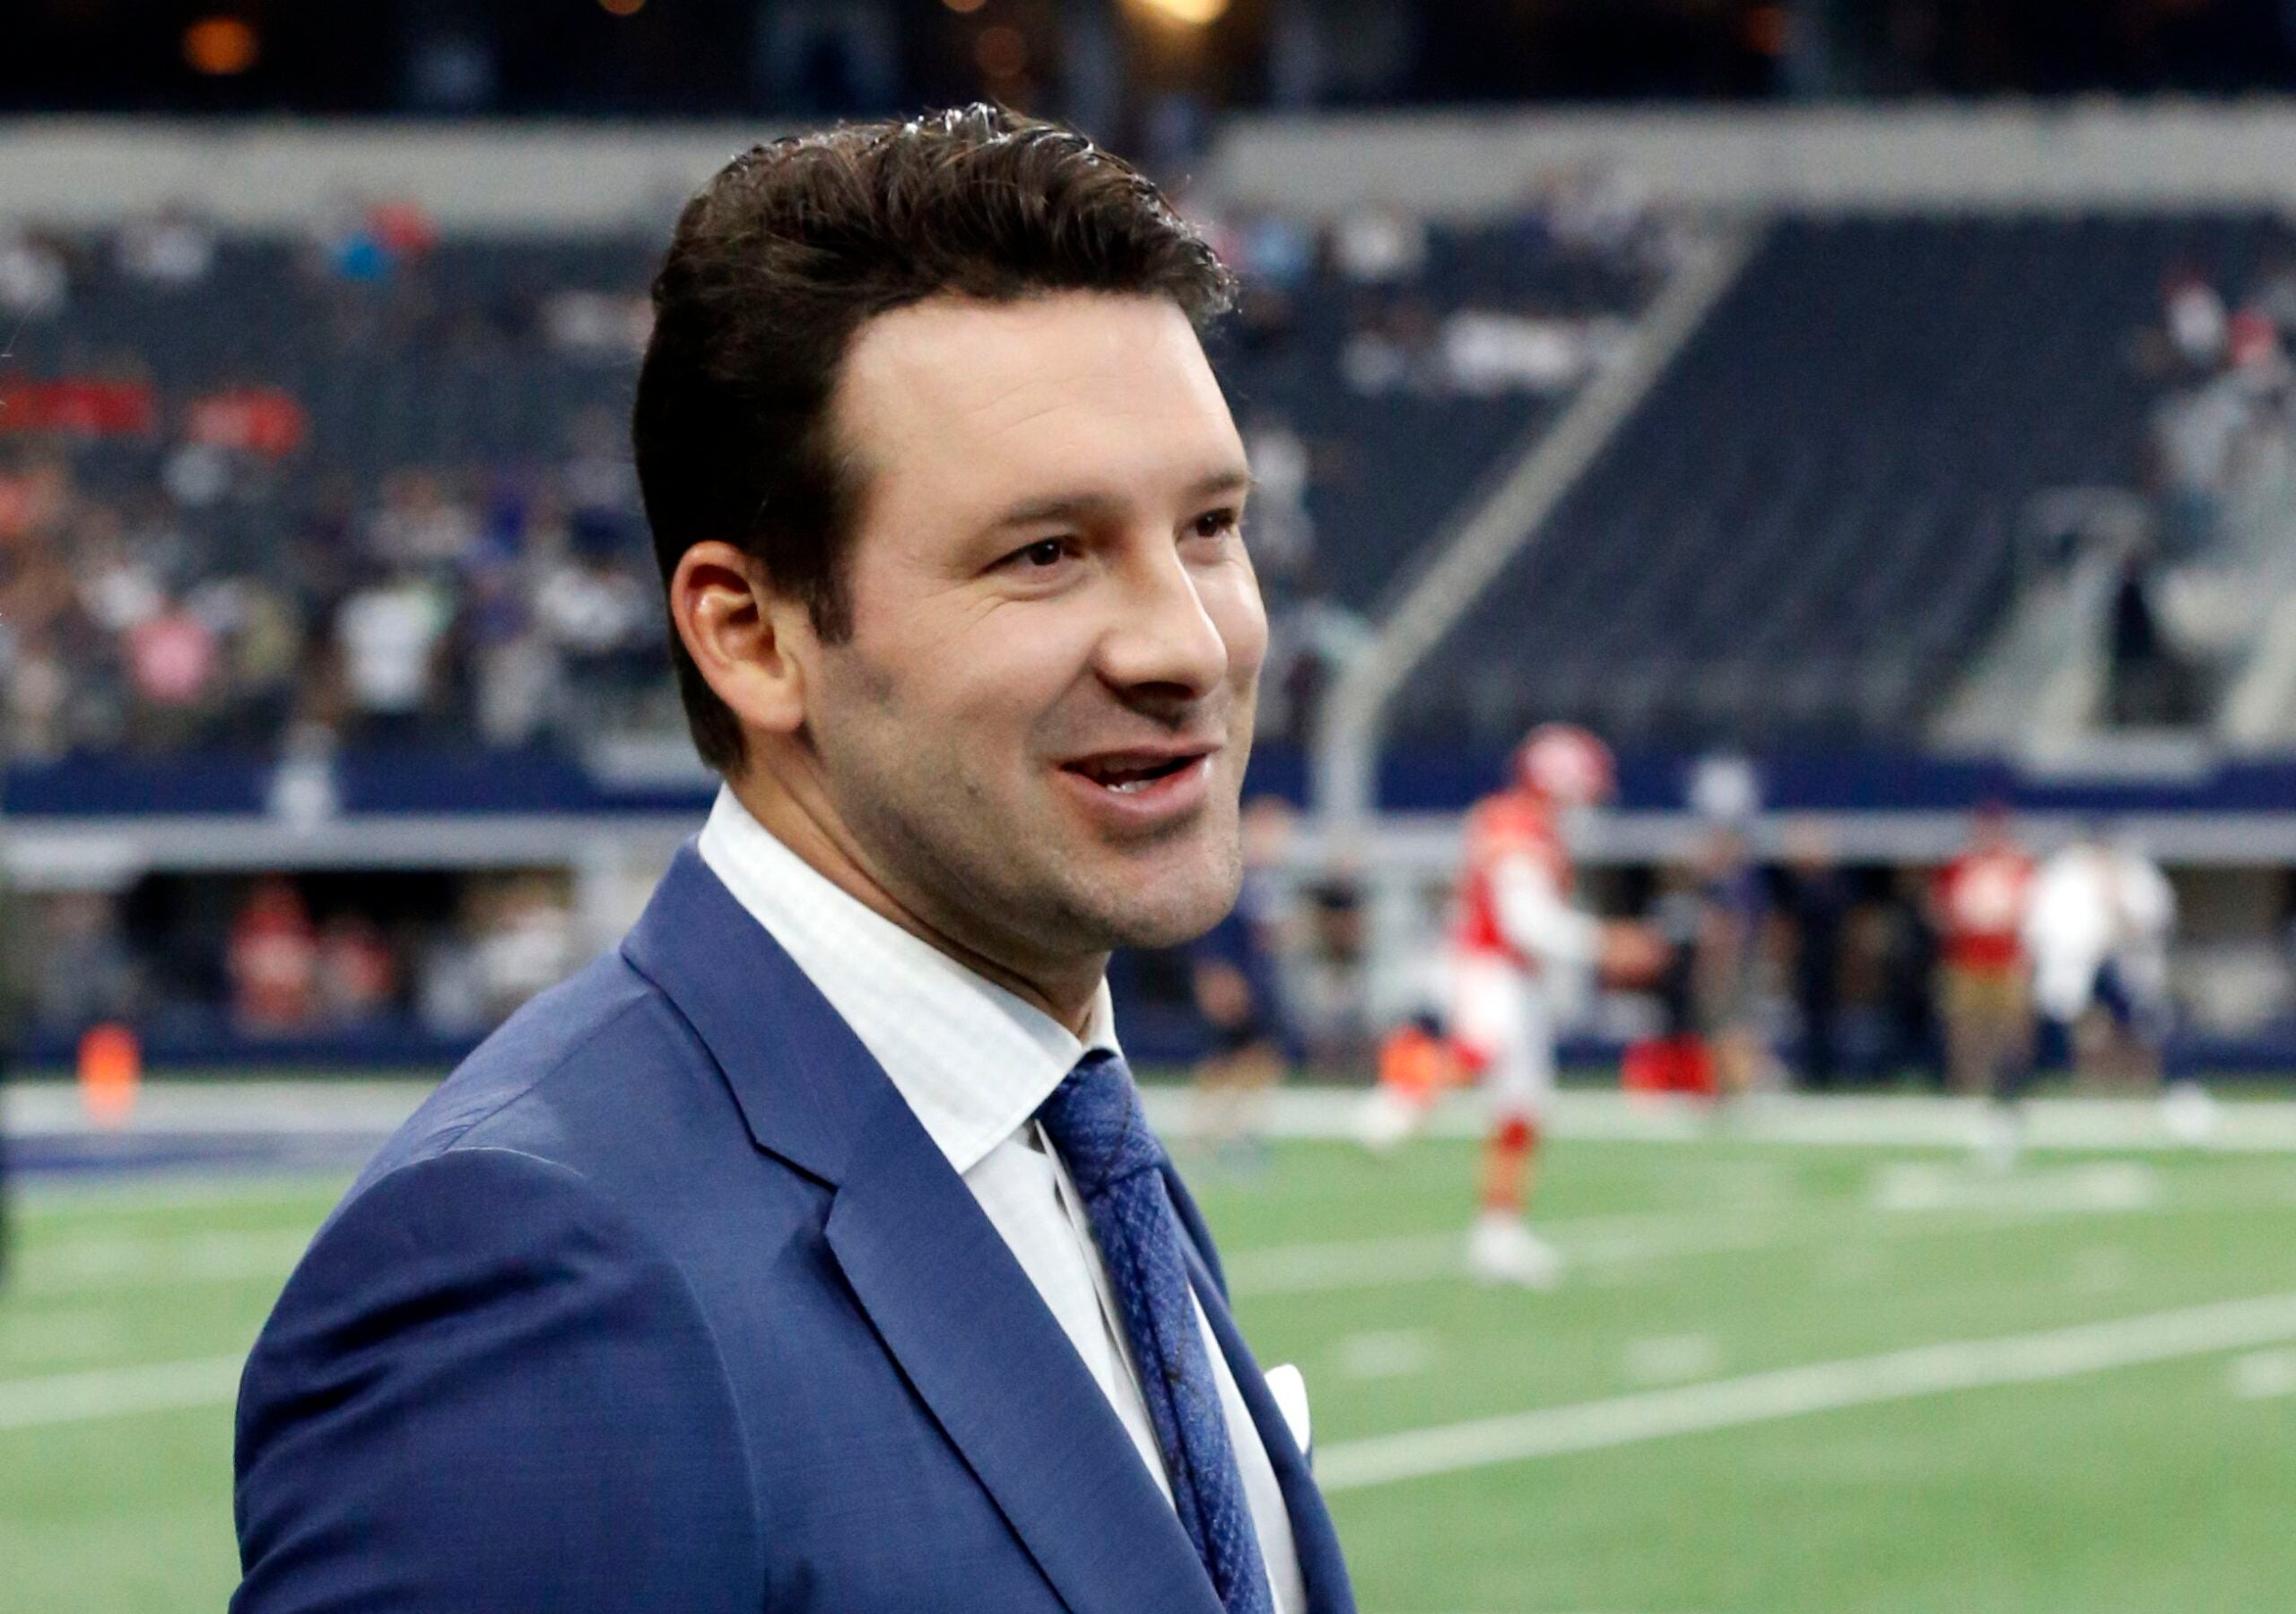 Tony Romo: 'New England is for real'